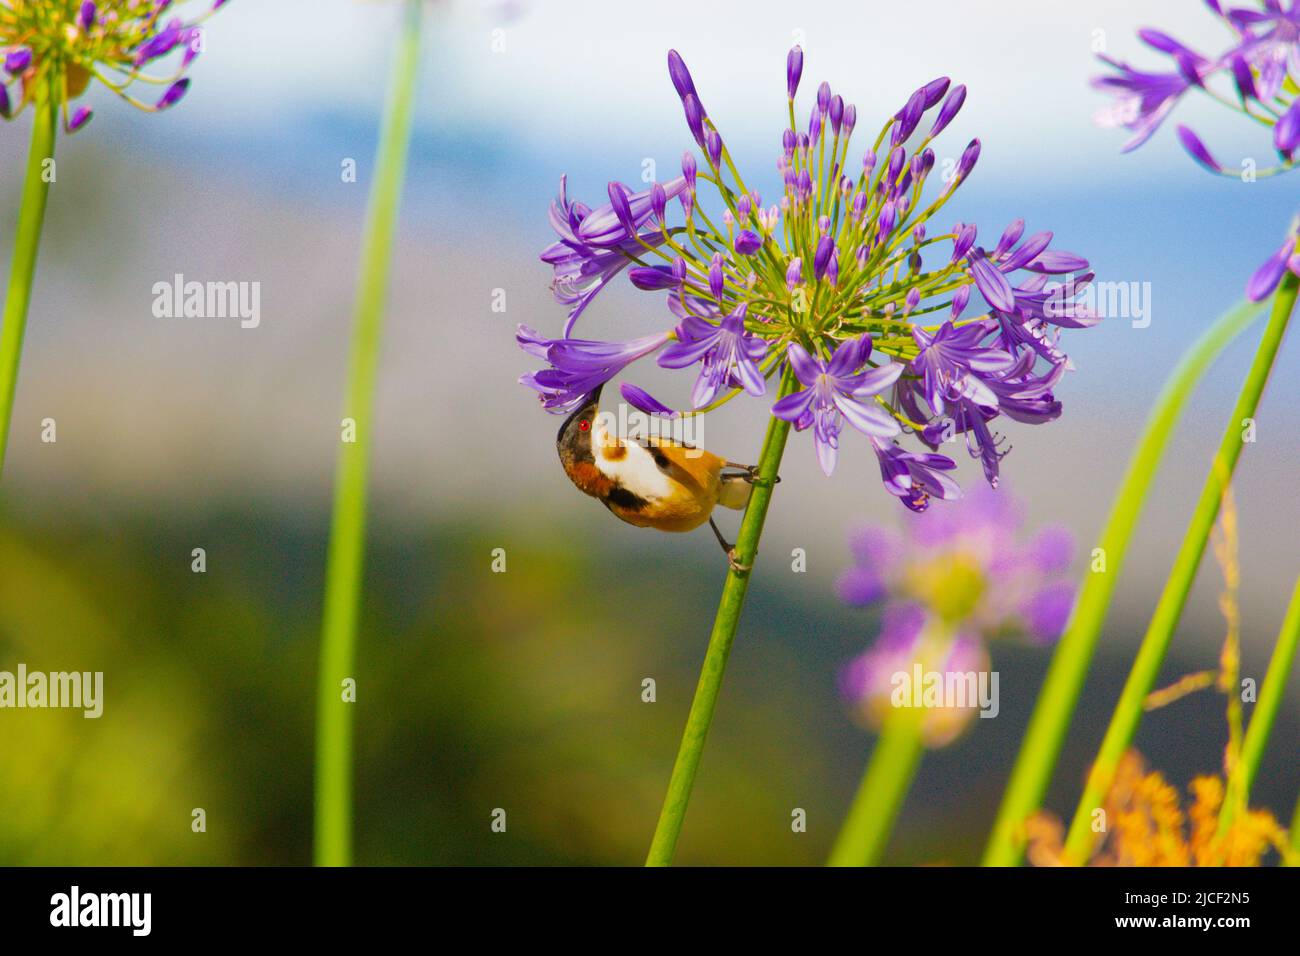 Vibrant photograph of an Eastern spinebill (Acanthorhynchus tenuirostris) feeding on an agapanthus flower Stock Photo